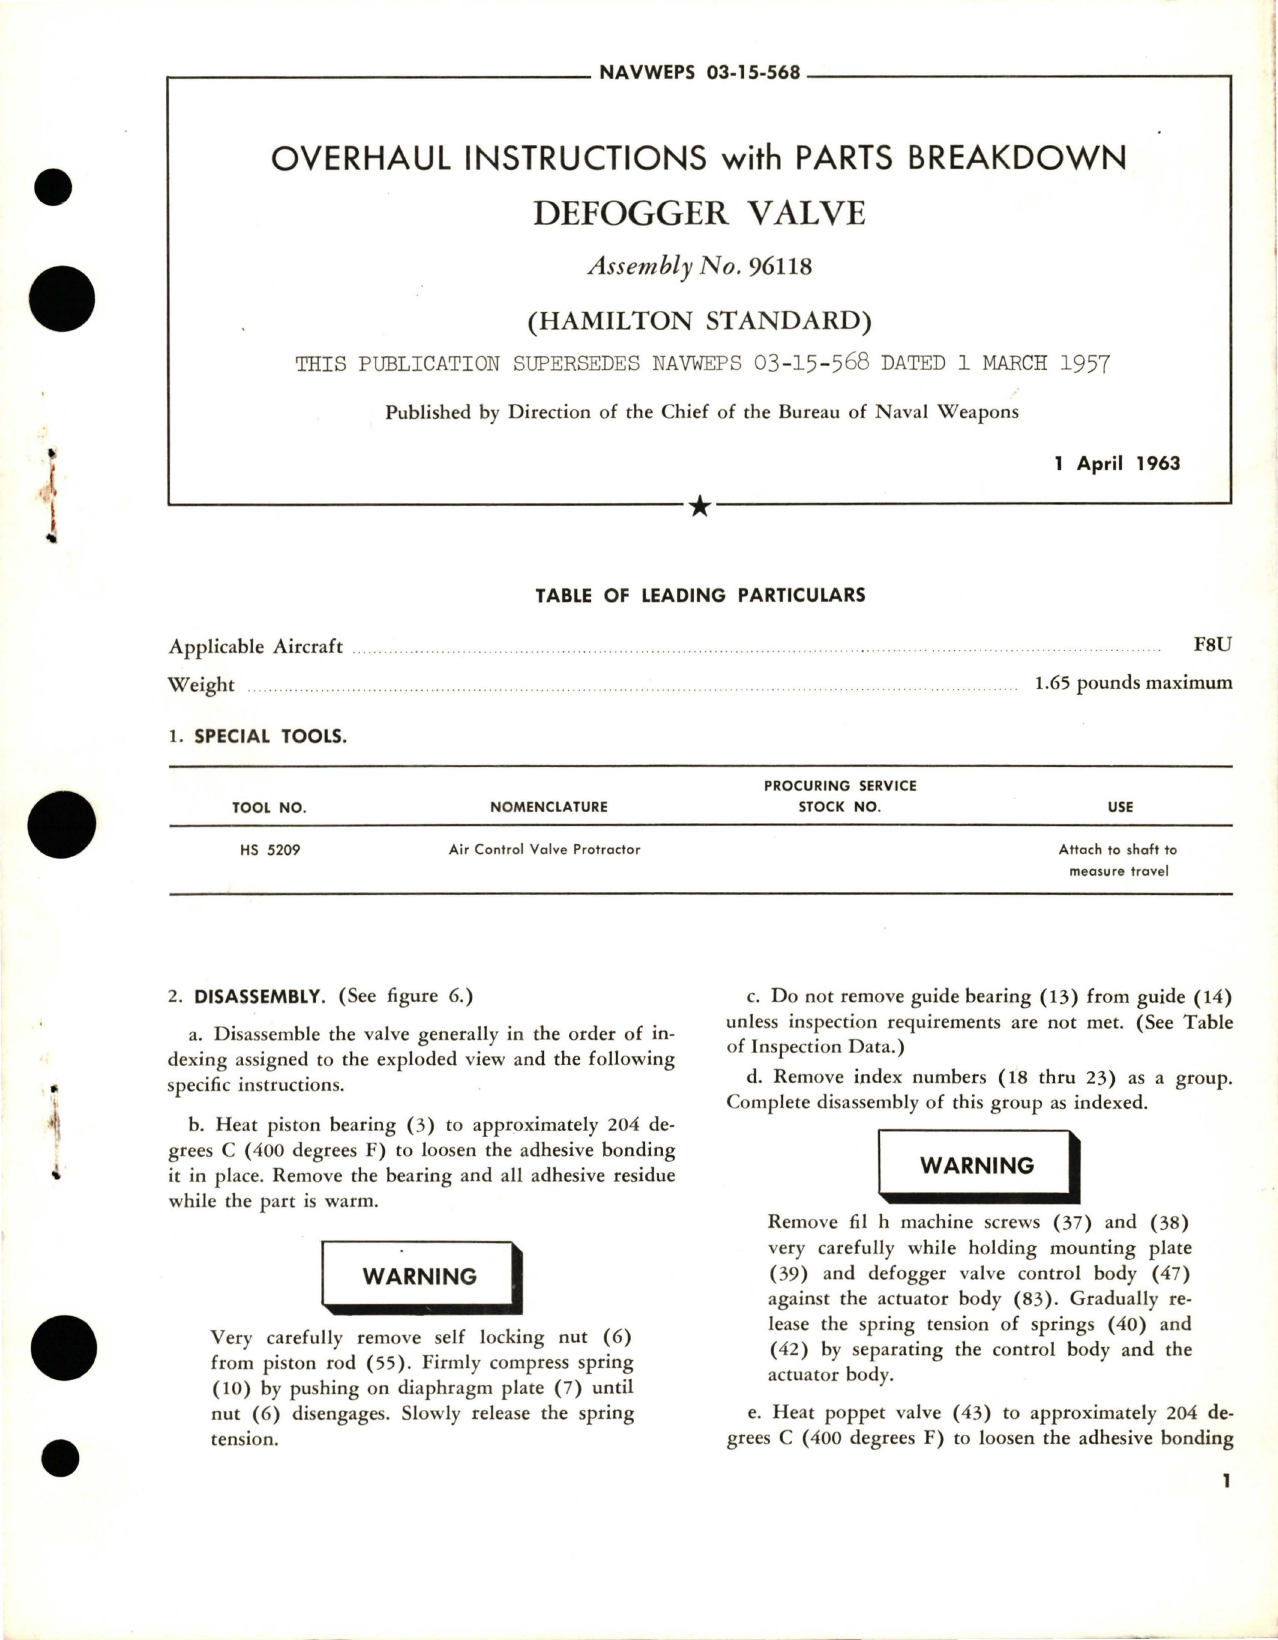 Sample page 1 from AirCorps Library document: Overhaul Instructions with Parts for Defogger Valve - Assembly No 96118